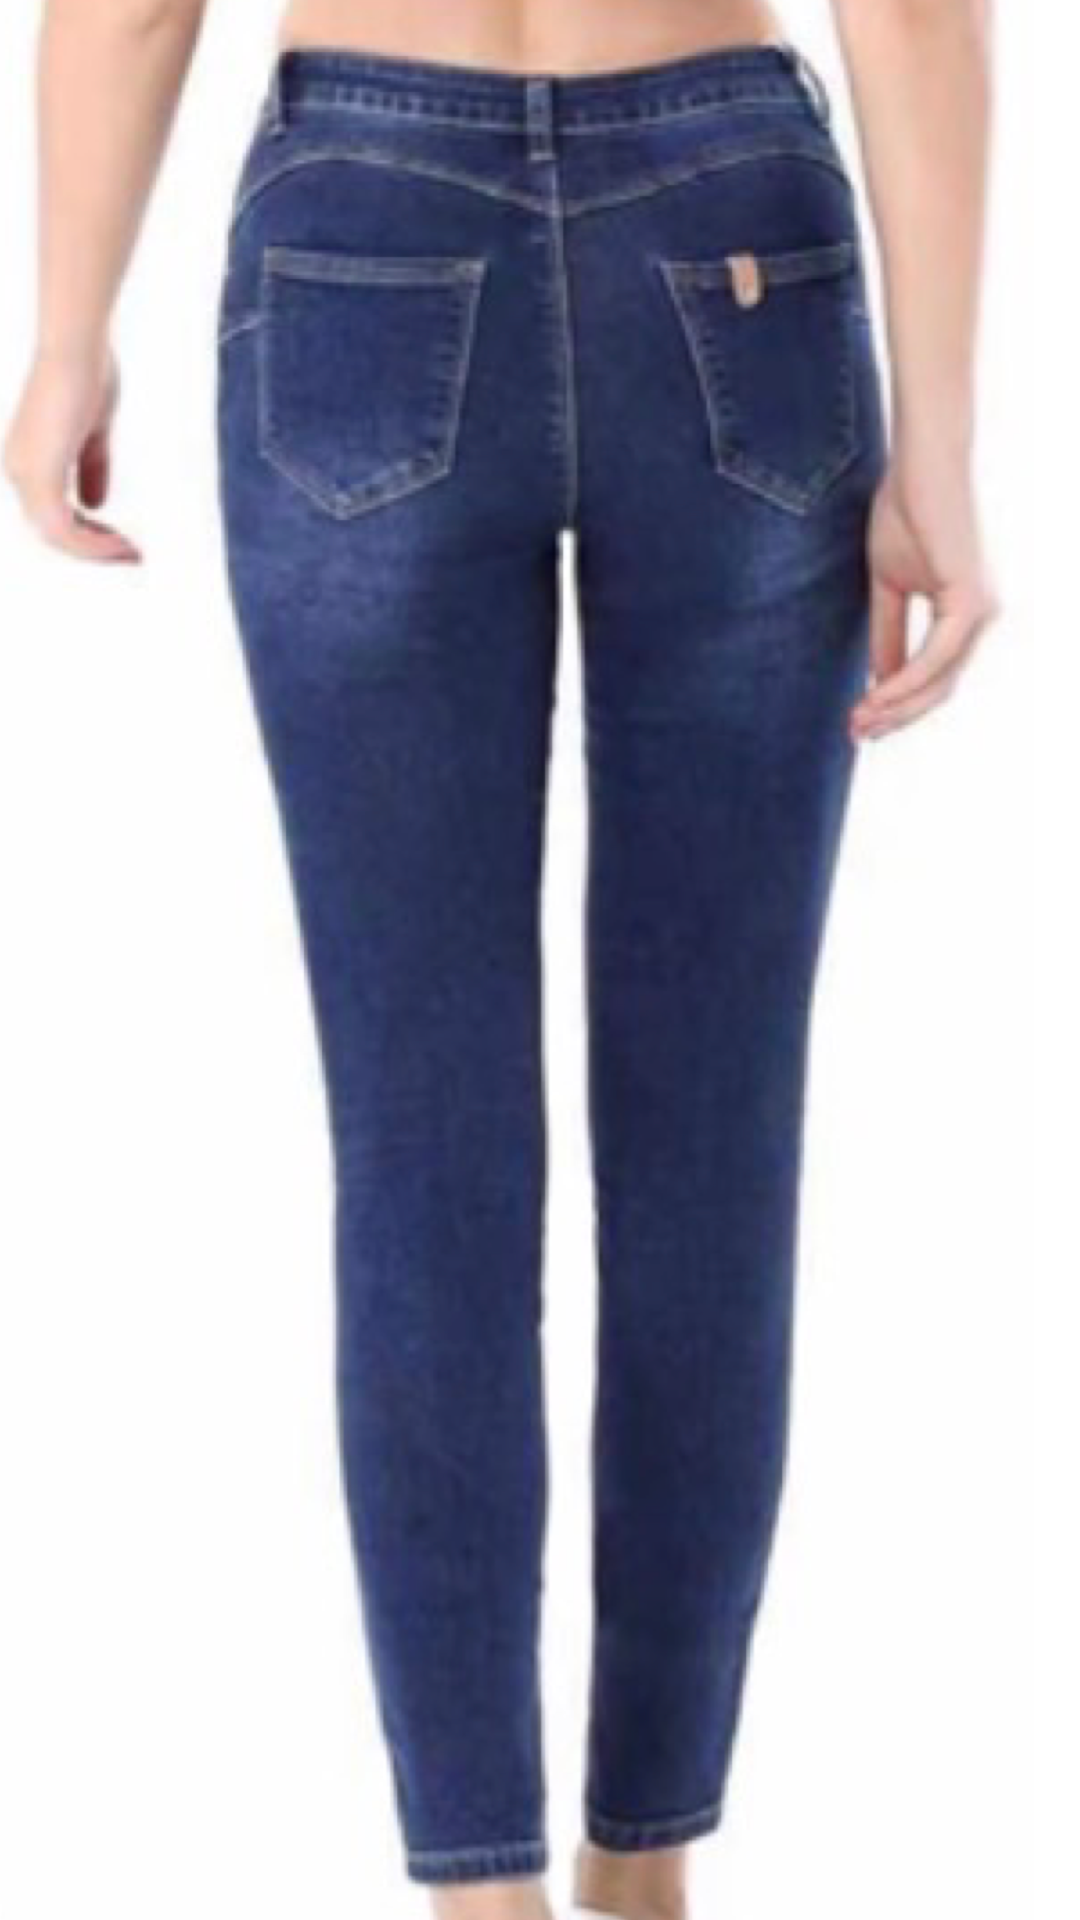 Fitted leg jeans by obscur